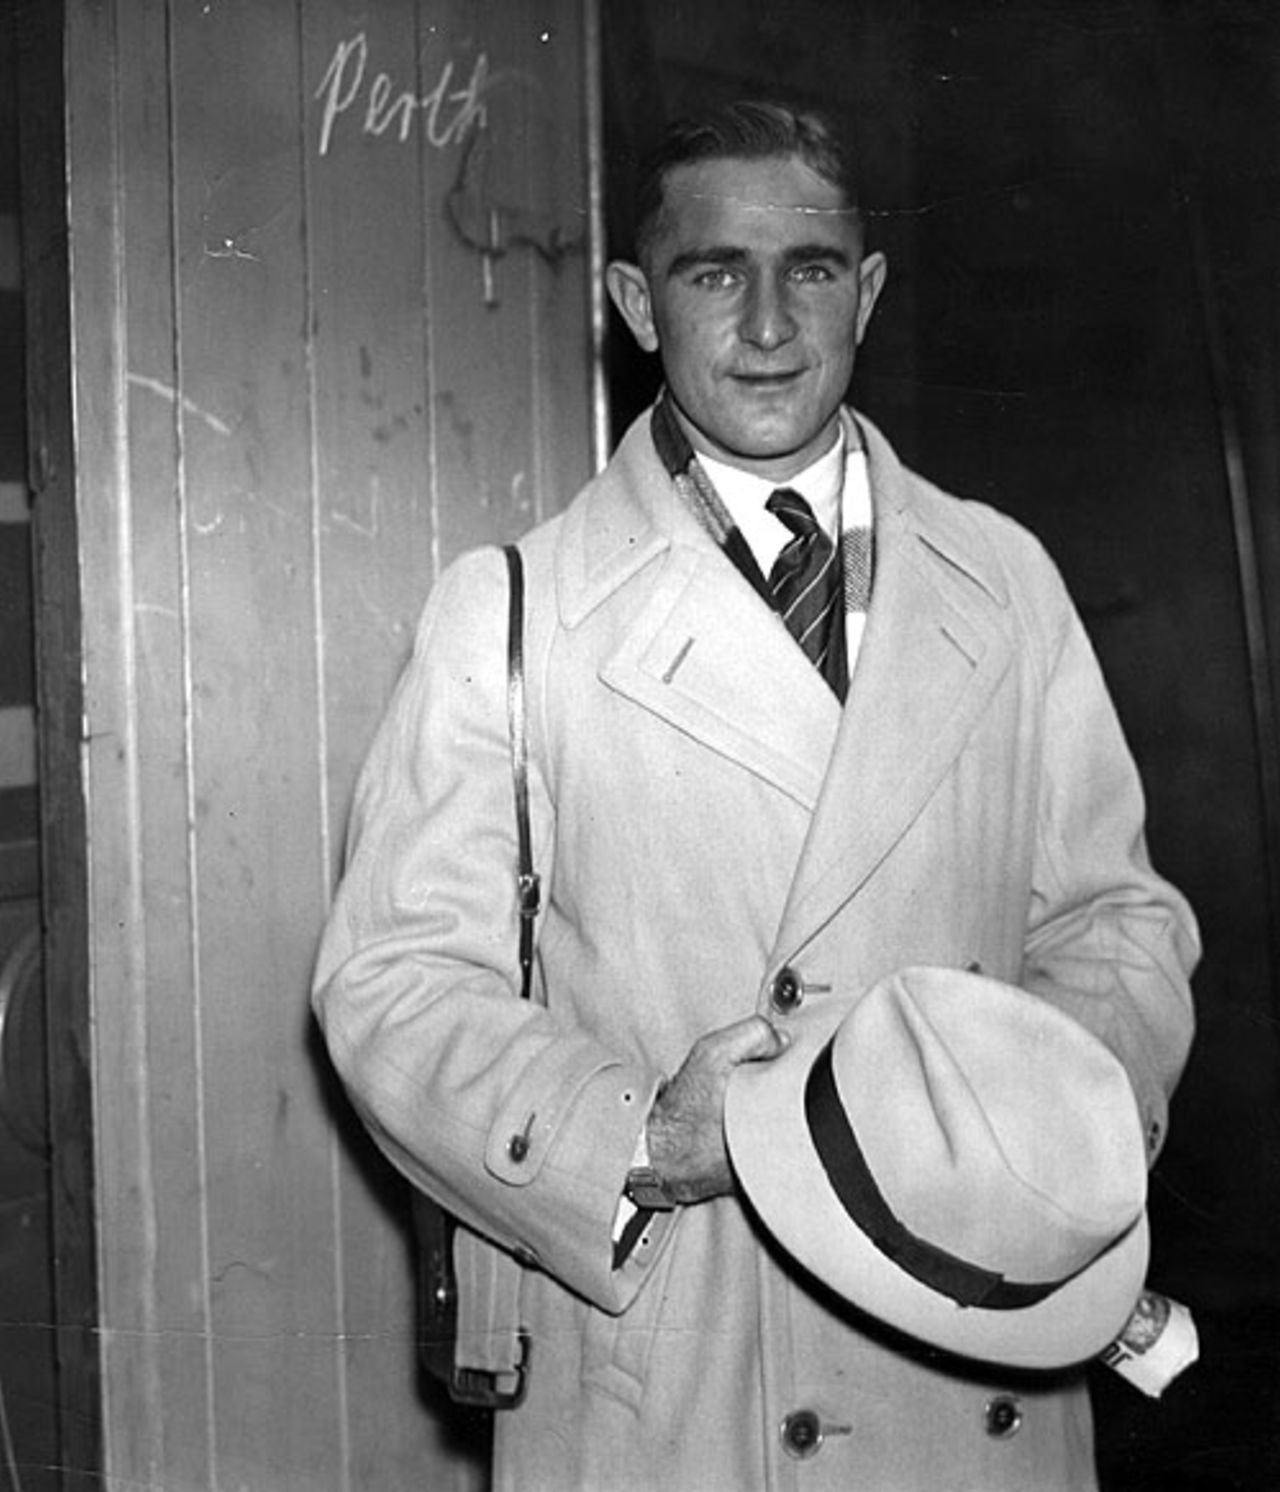 Sid Barnes on his arrival at Waterloo Station, London, April 1938